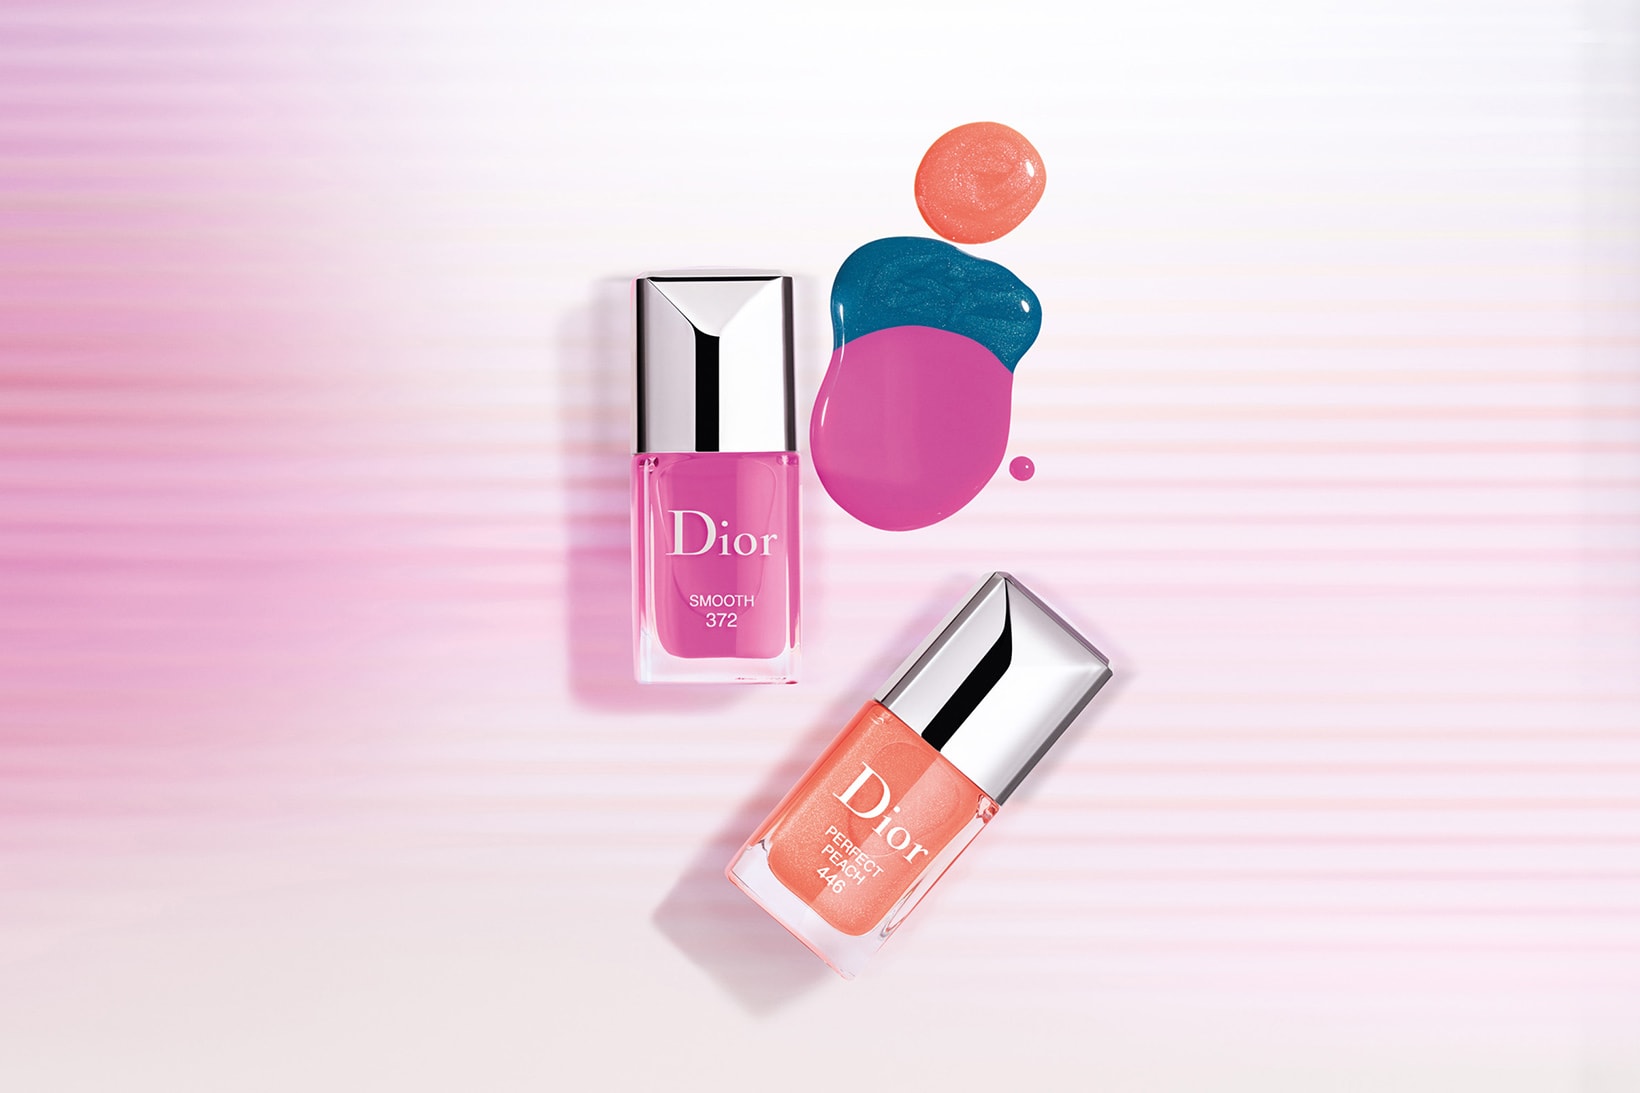 Dior Beauty "Glow Vibes" Spring Summer 2020 Makeup Collection Vernis Nail Polish Smooth Perfect Peach